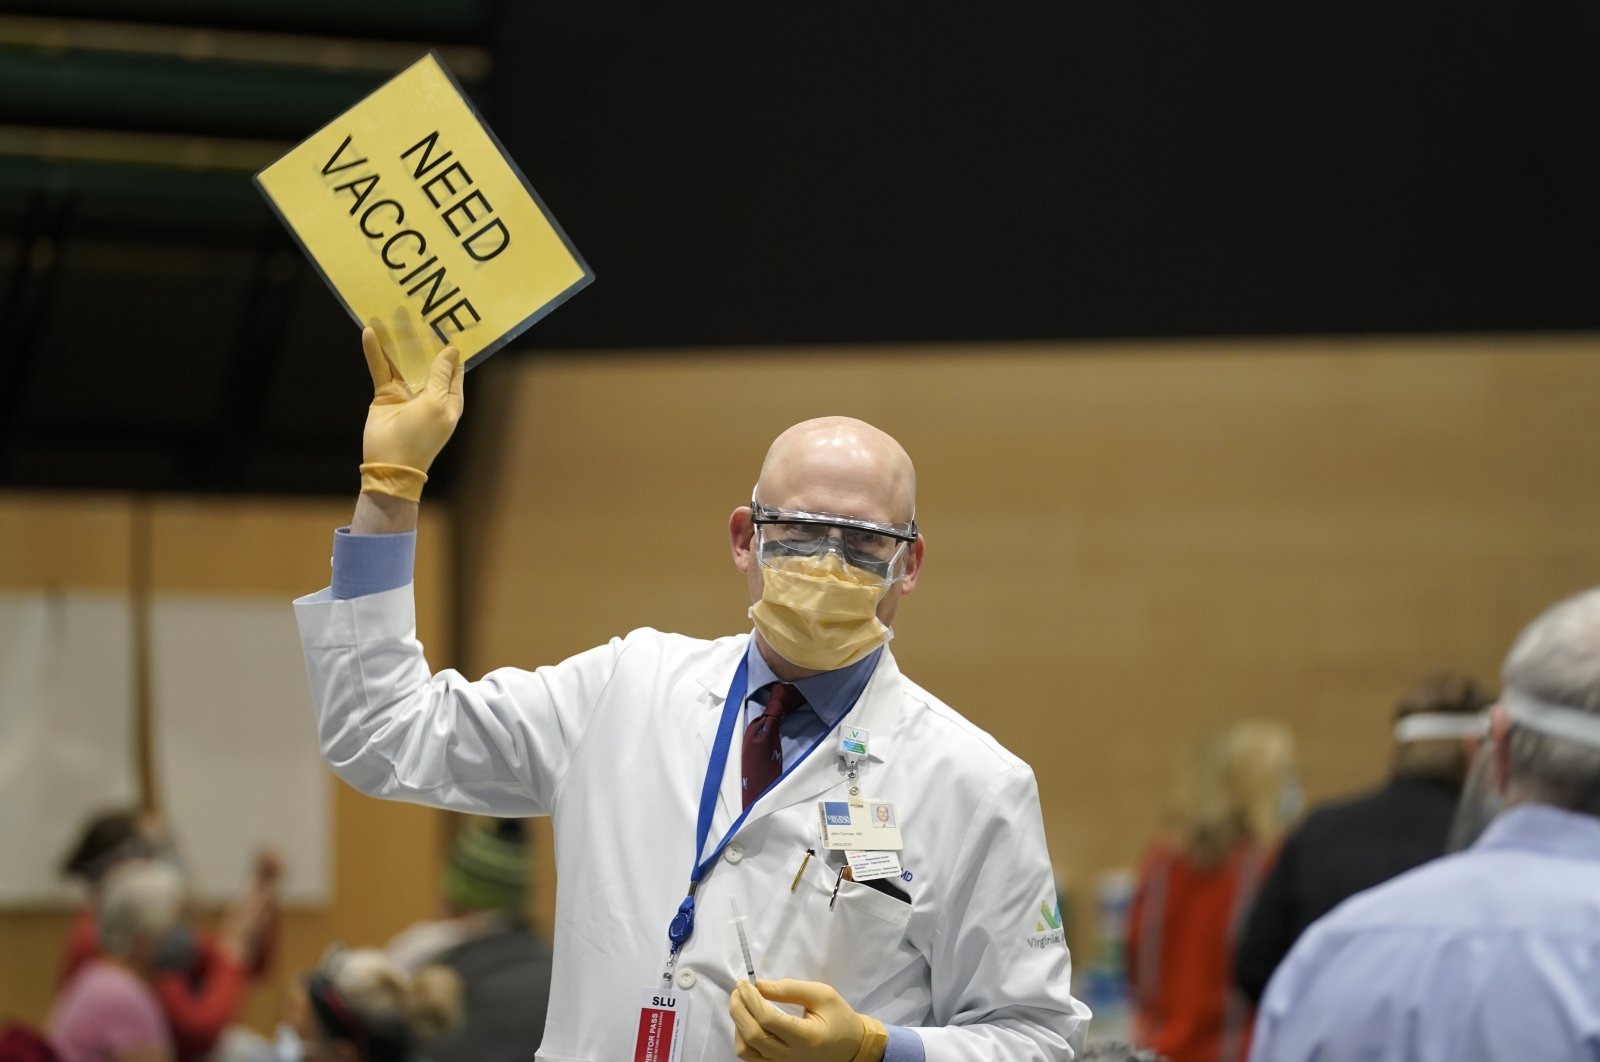 Dr. John Corman, the chief clinical officer for Virginia Mason Franciscan Health, holds a sign that reads "Need Vaccine" to signal workers to bring him more doses of the Pfizer vaccine for COVID-19 in Seattle, Washington state, U.S., Jan. 24, 2021. (AP Photo)